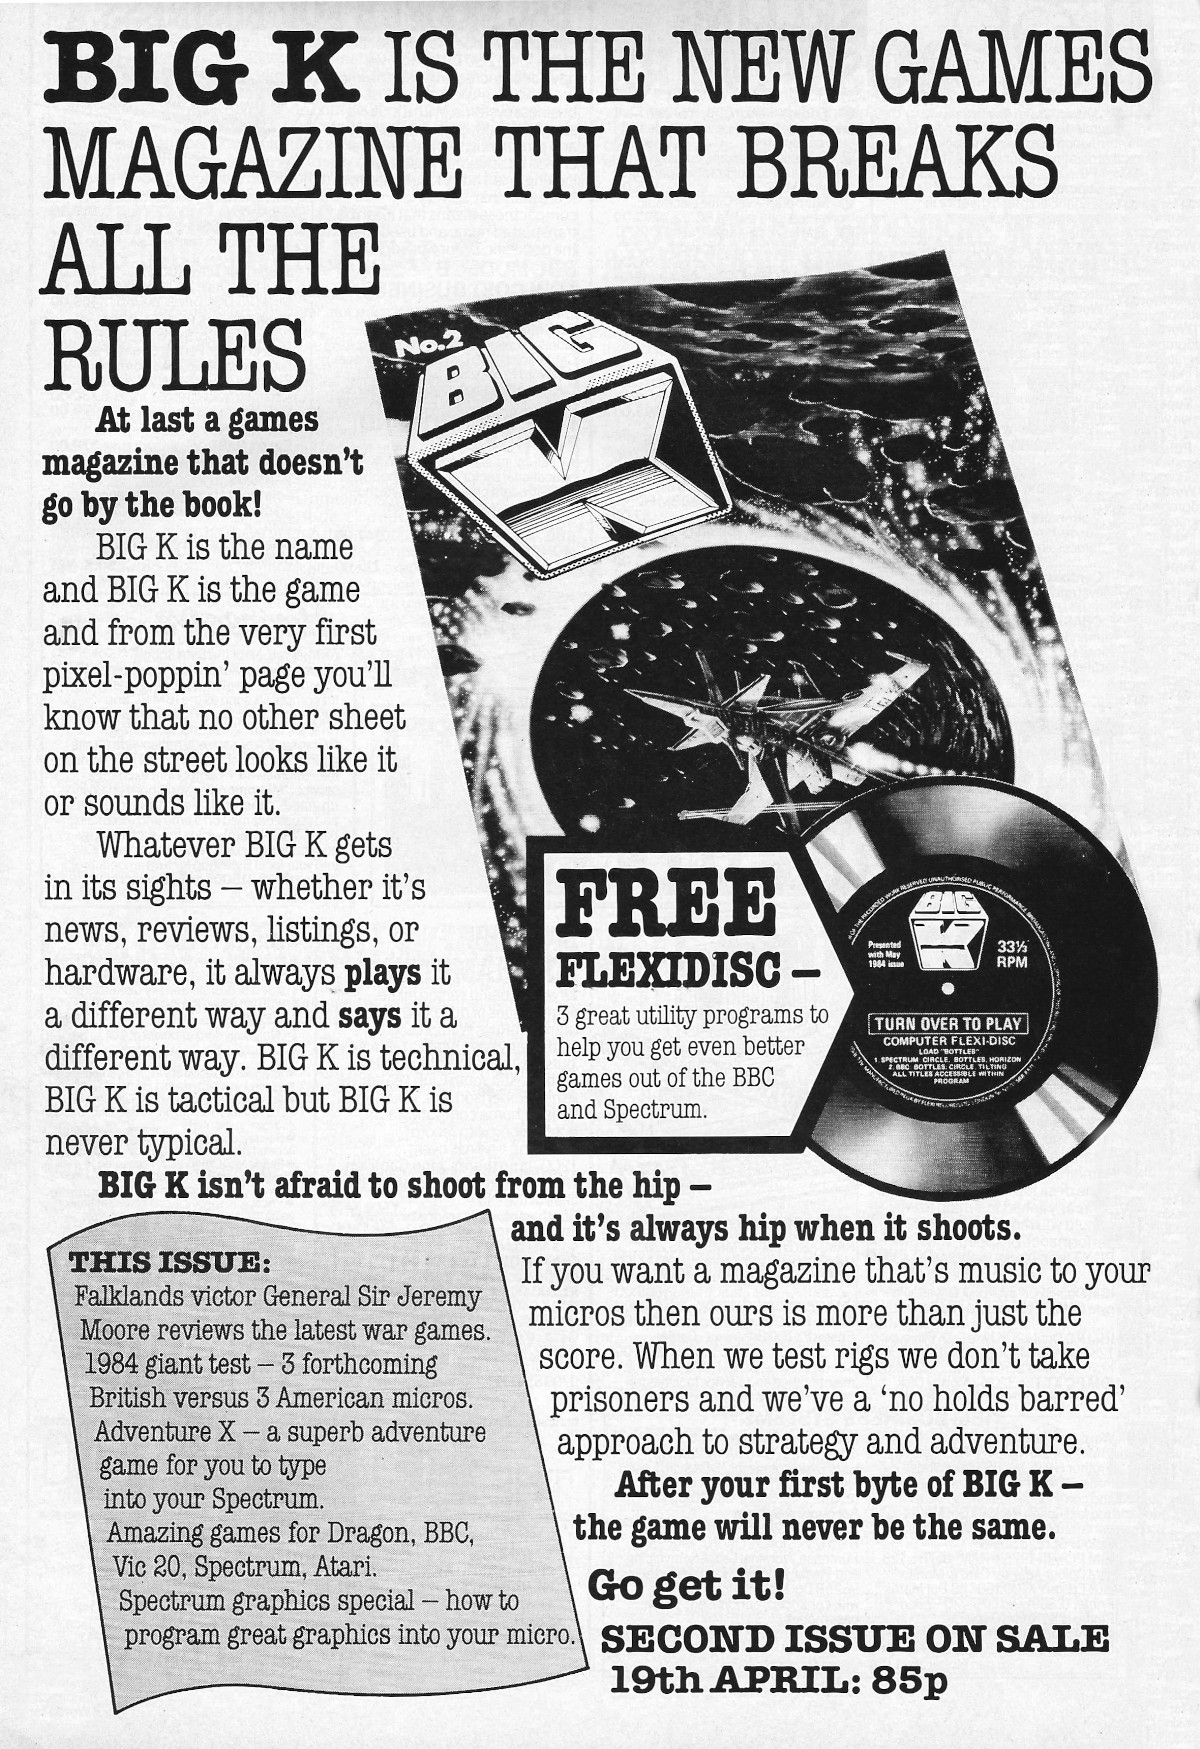 A flexidisc offered as part of the number 2 issue of Big K - the games magazine that 